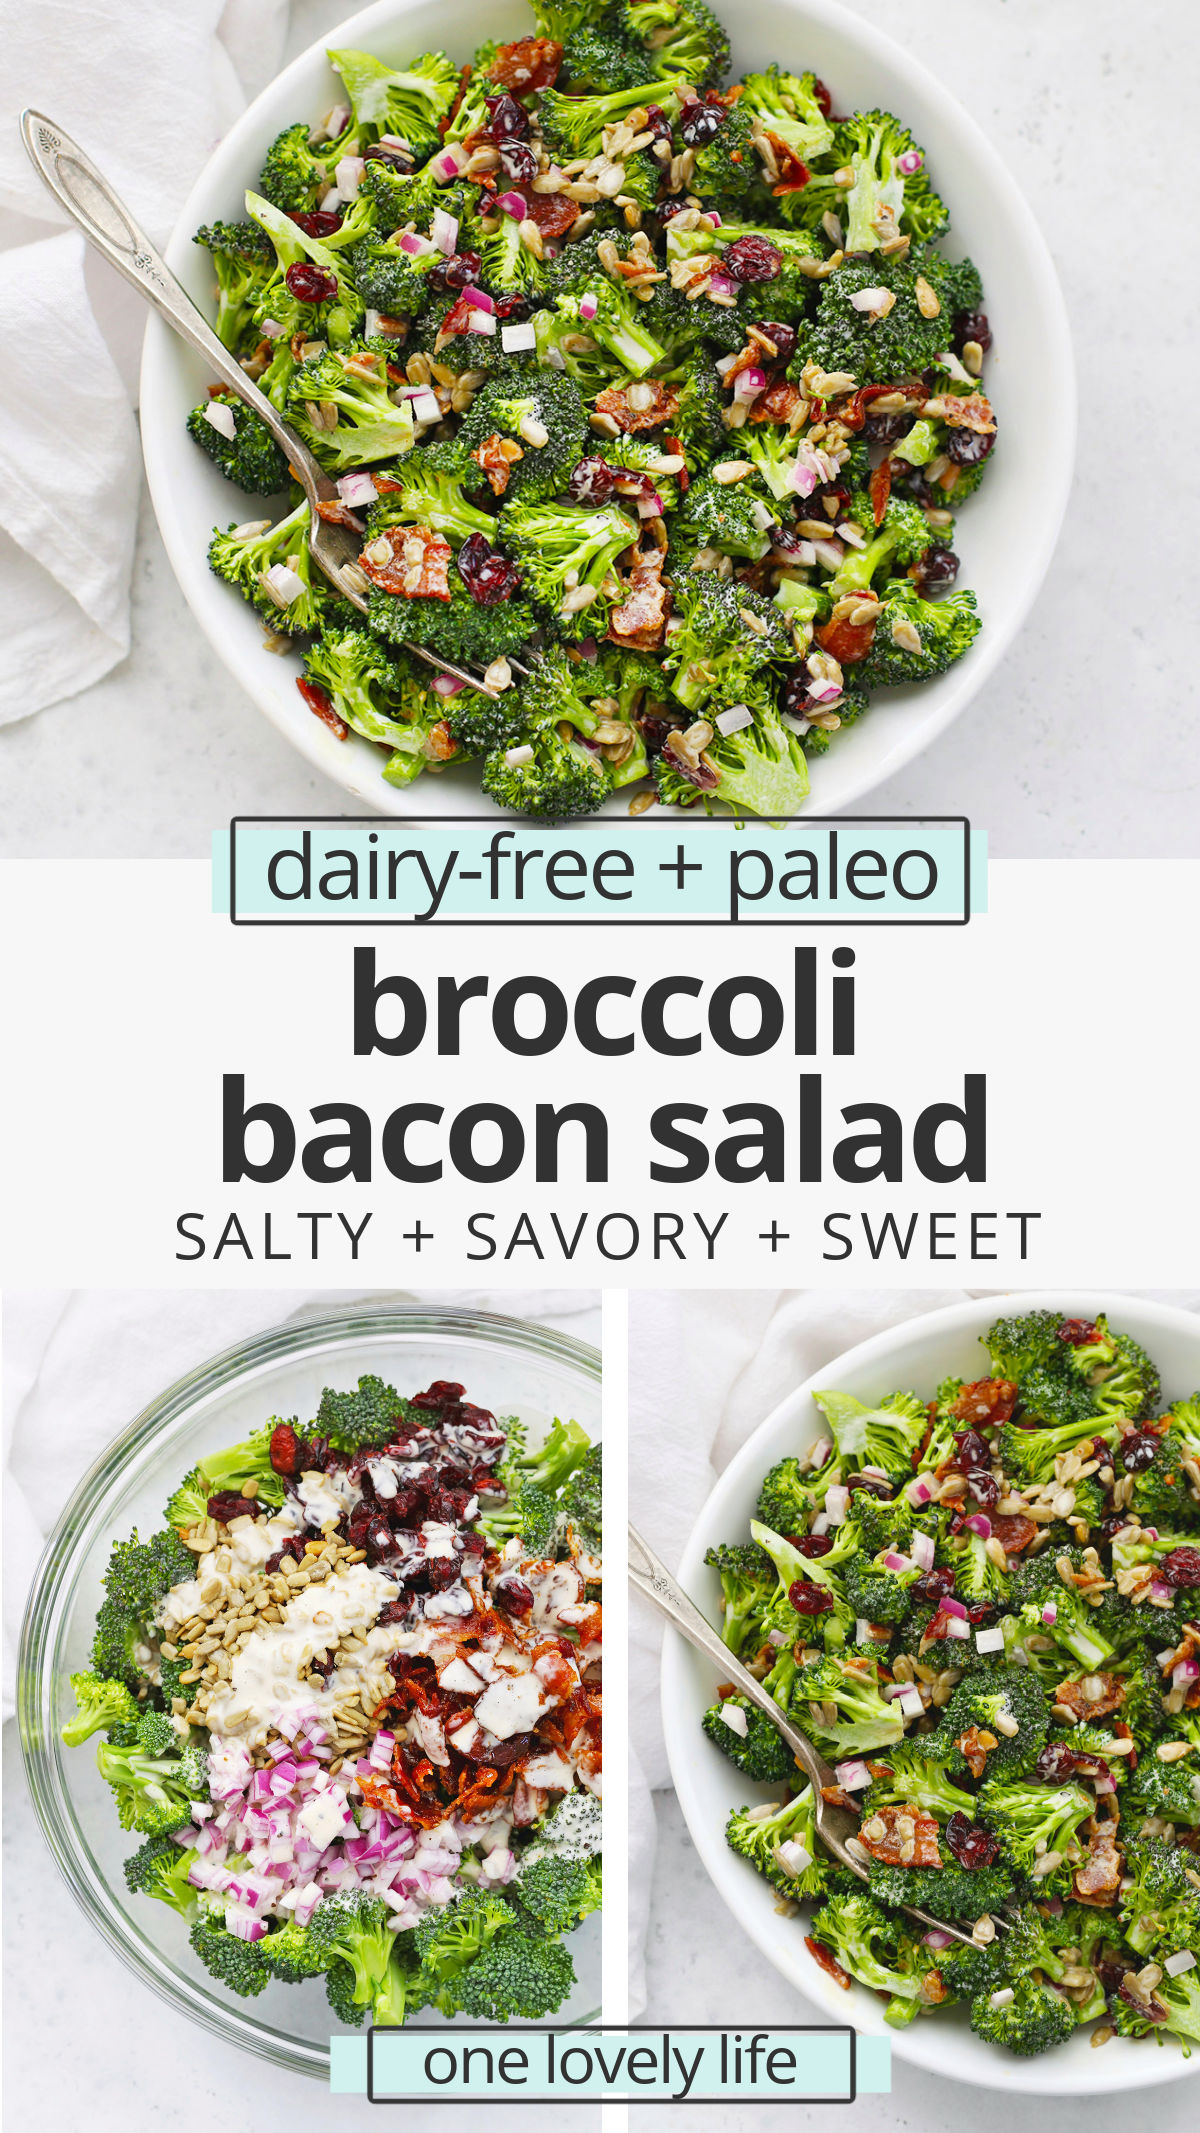 Broccoli Bacon Salad - This classic broccoli salad is one of my favorite summer salads for barbecues, picnics, and potlucks. (Gluten-Free, Paleo-Friendly) // Paleo Broccoli Salad // Gluten-Free Broccoli Salad // Summer Side Dish // Broccoli Salad Dressing // Creamy Broccoli Salad // broccoli salad with bacon // BBQ side dish // summer salad // potluck salad